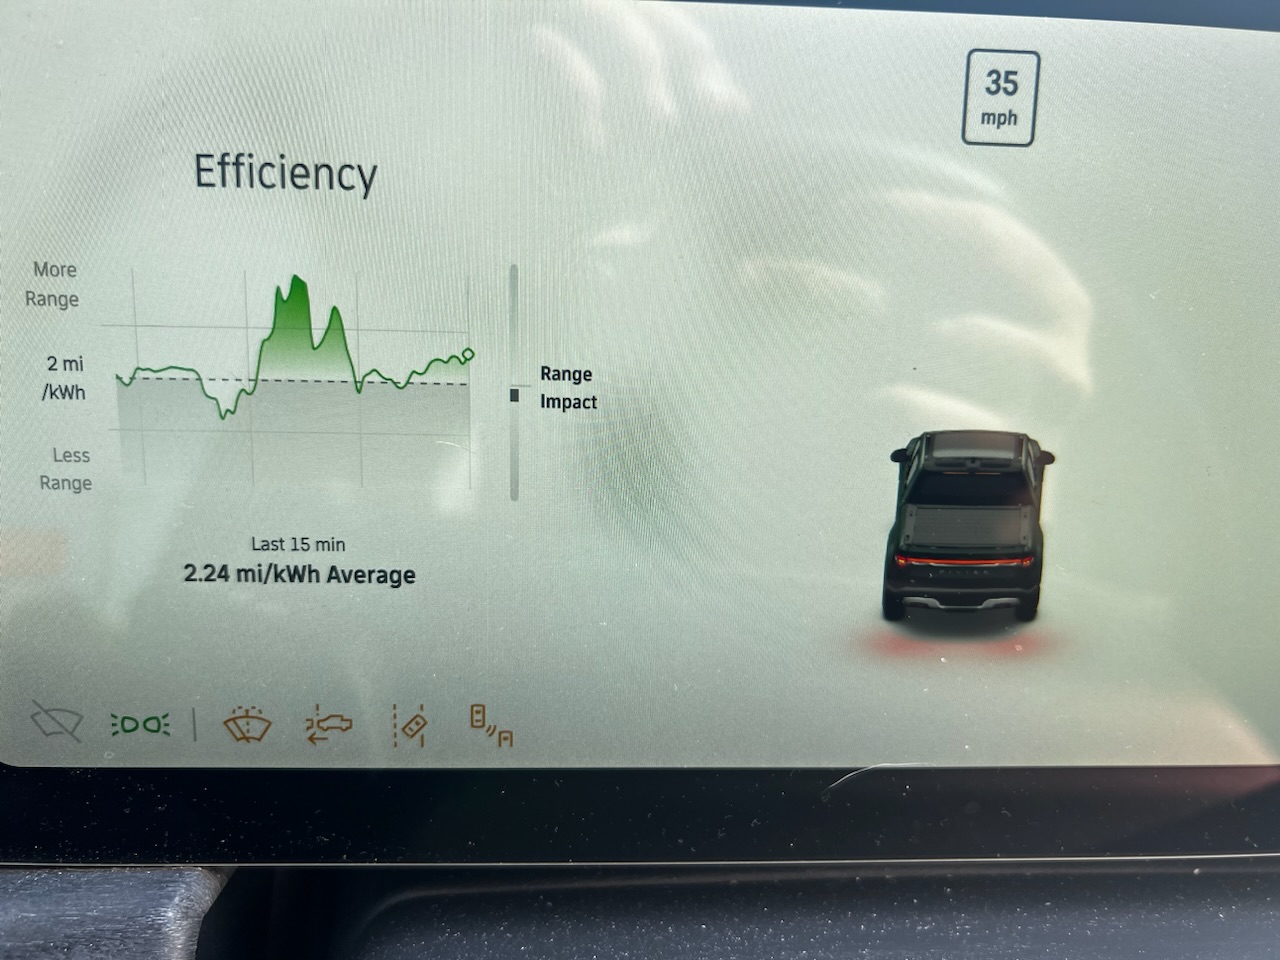 Rivian R1T R1S 2023.10.0 software update OTA released. Includes  Tesla Supercharger network option and 12v battery draining issue fix 4C6EA301-1473-46AF-910C-A858567A7B6F